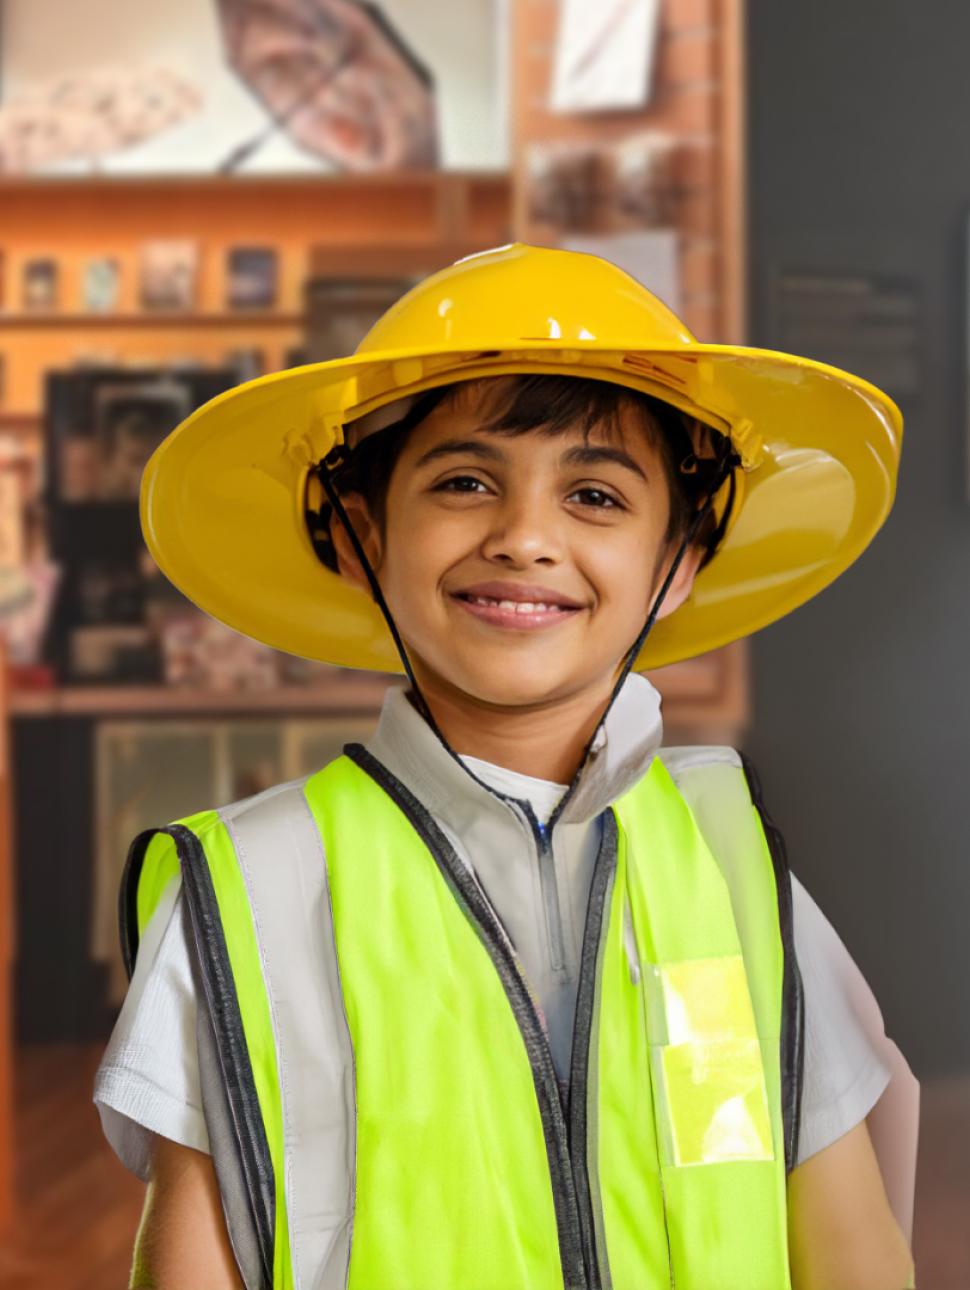 A young boy wears a yellow hard hat, a high visibility vest and smiles. They are standing in the Museum gallery entrance